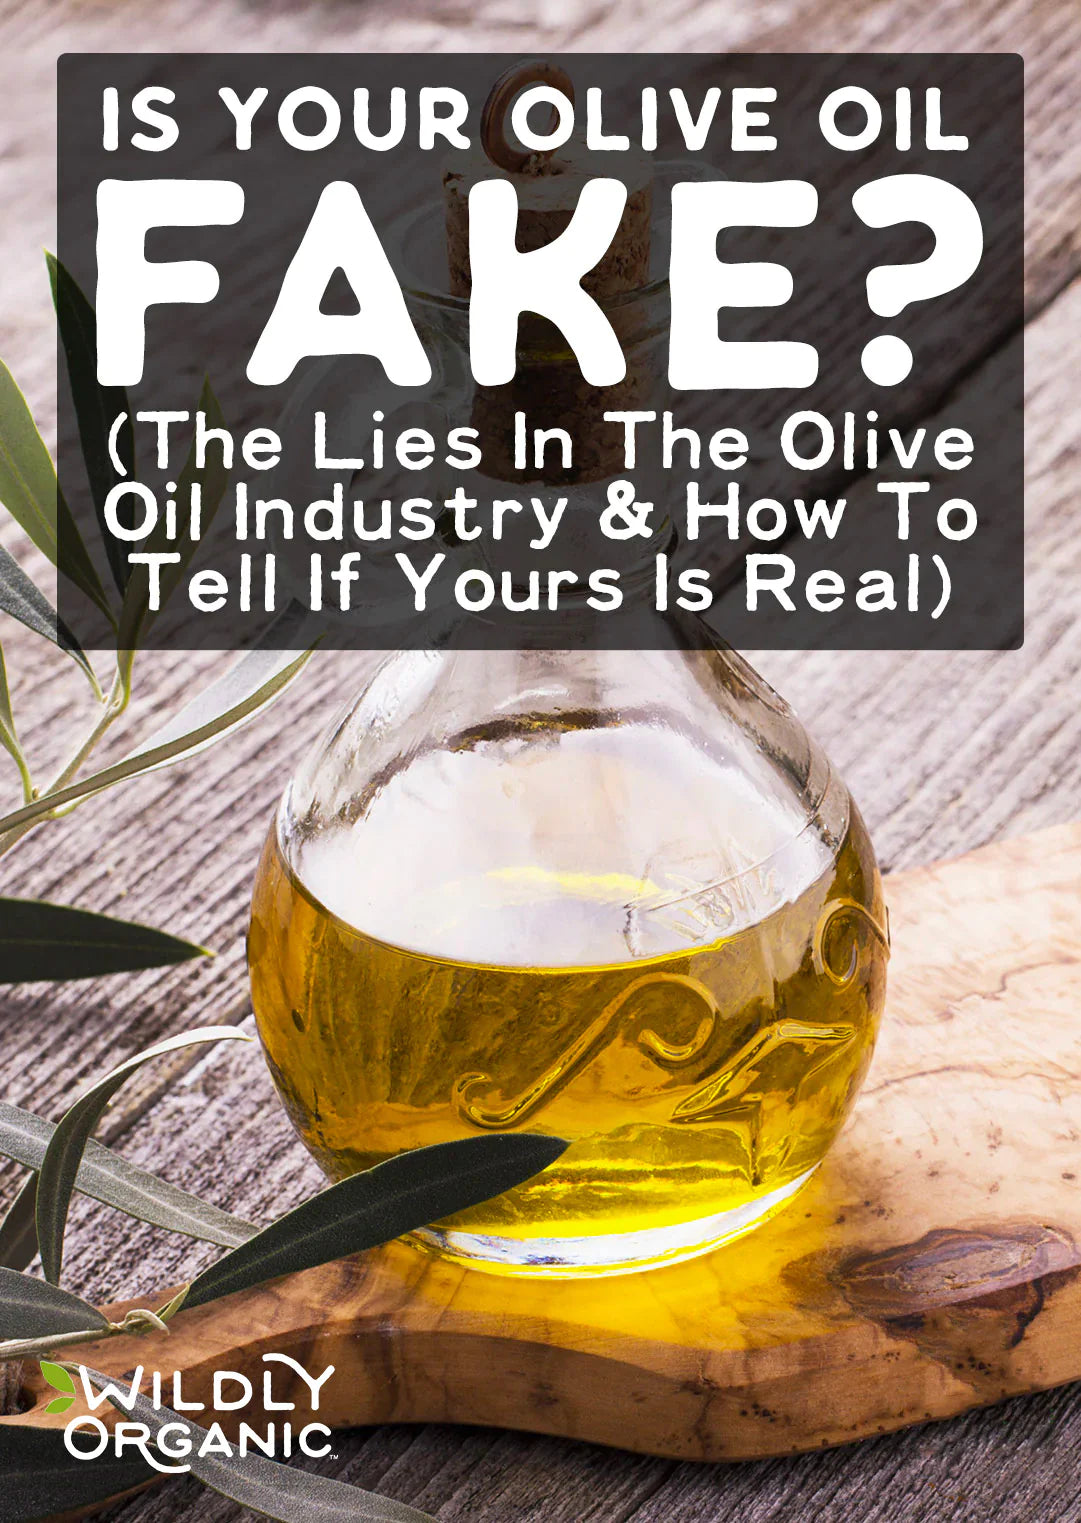 Is Your Olive Oil Fake? (The Lies In The Olive Oil Industry & How To Tell If Yours Is Real) | Let's expose the lies in the olive oil industry, including how real olive oil is cut with cheaper vegetable oils. Then, learn how to tell if your olive oil is real or an imposter. | WildernessFamilyNaturals.com